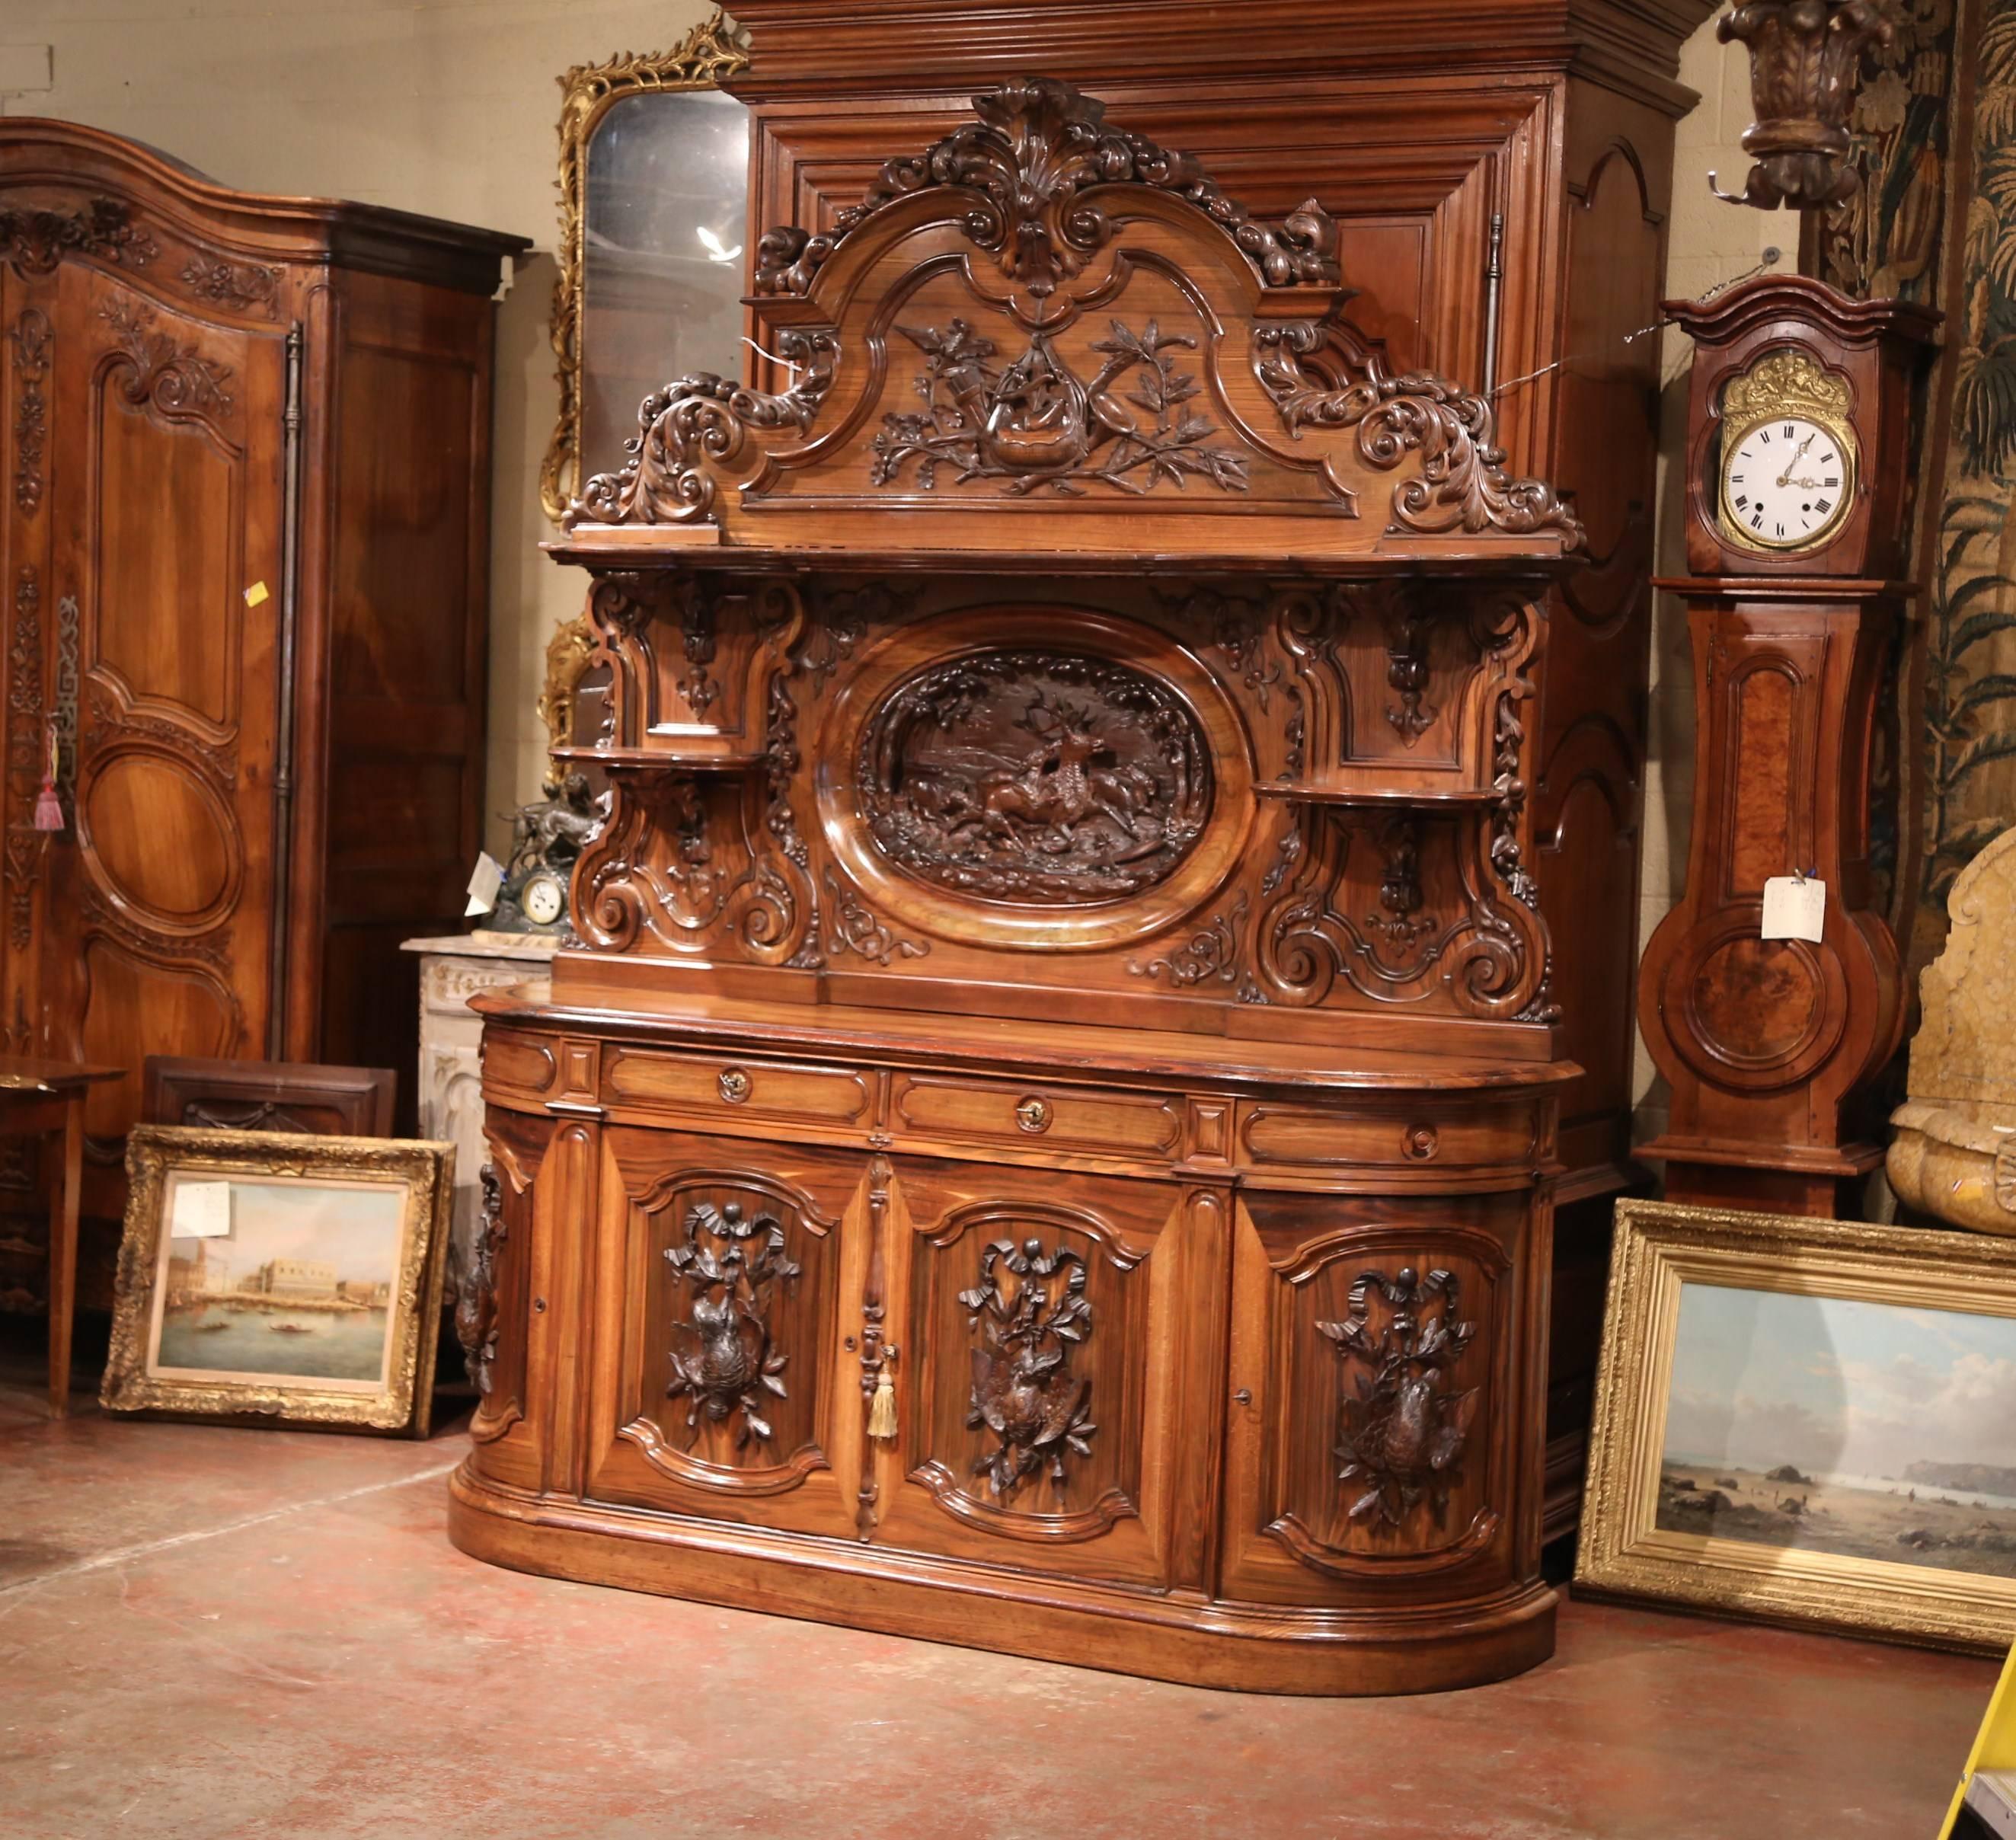 This important, antique Black Forest sideboard was crafted in France, circa 1850. The unique, highly detailed cabinet made of three sections, features exquisite carvings throughout, including a center oval medallion hunting scene with running dogs